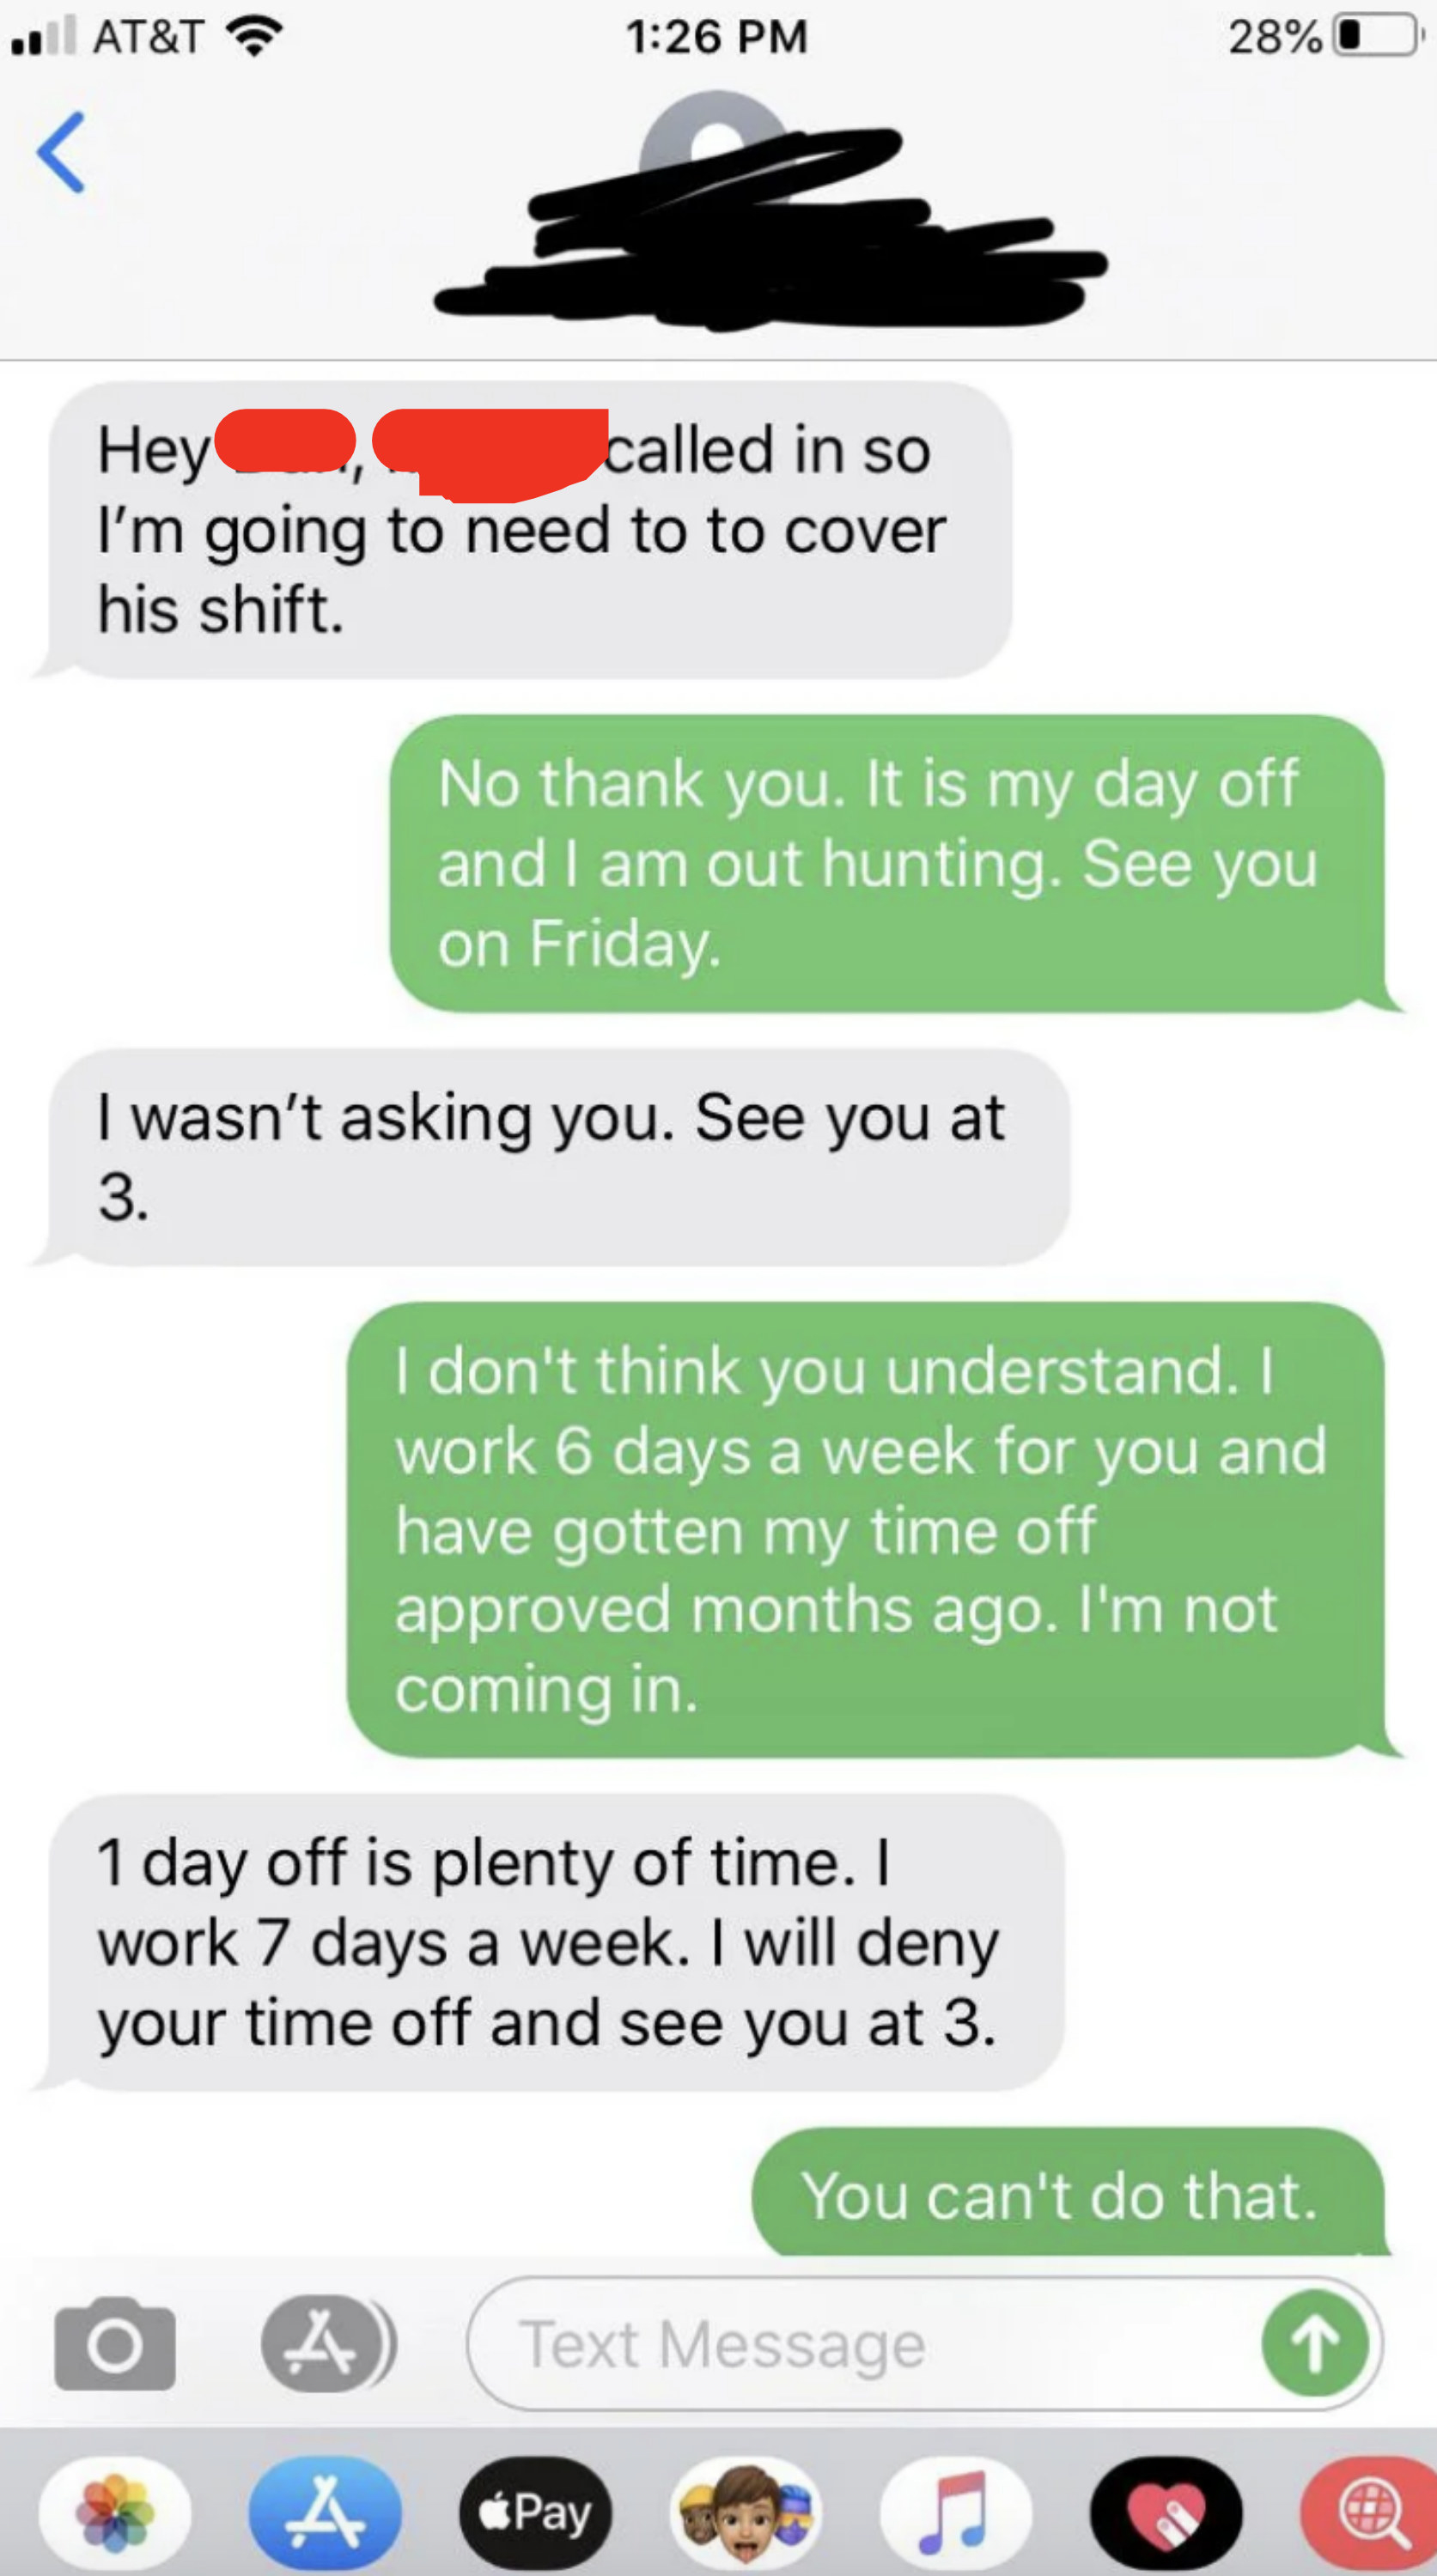 Boss threatening employee when they requested time off